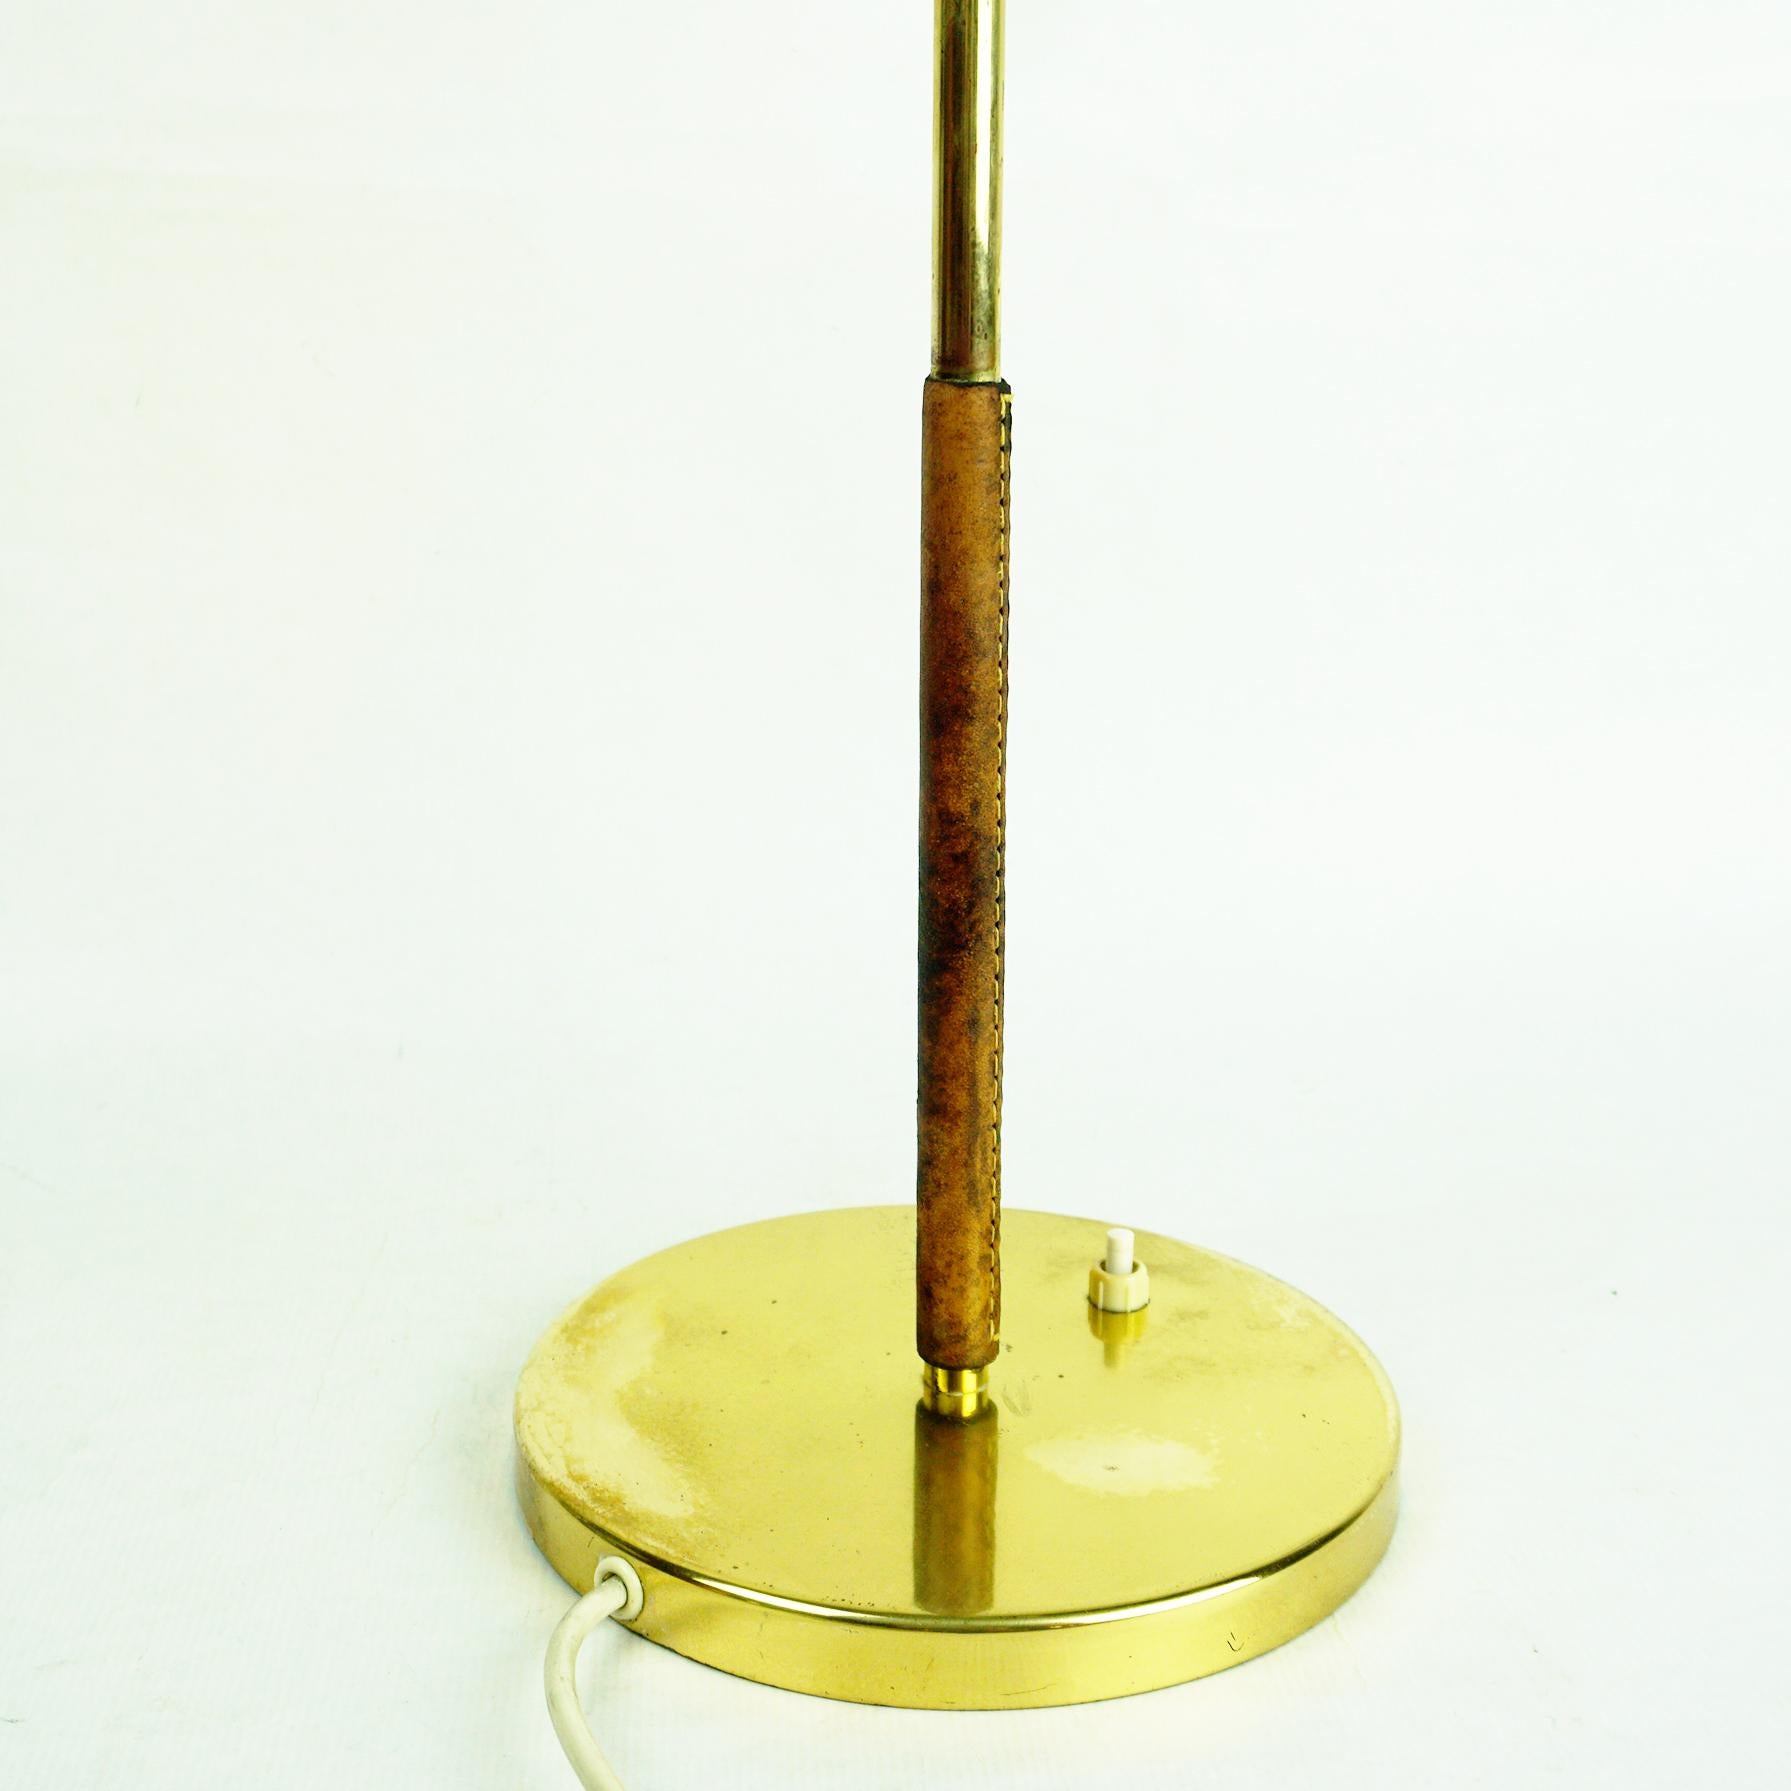 Austrian Midcentury Brass and Leather Table Lamp Mod. 1268 Essen by J. T. Kalmar For Sale 9